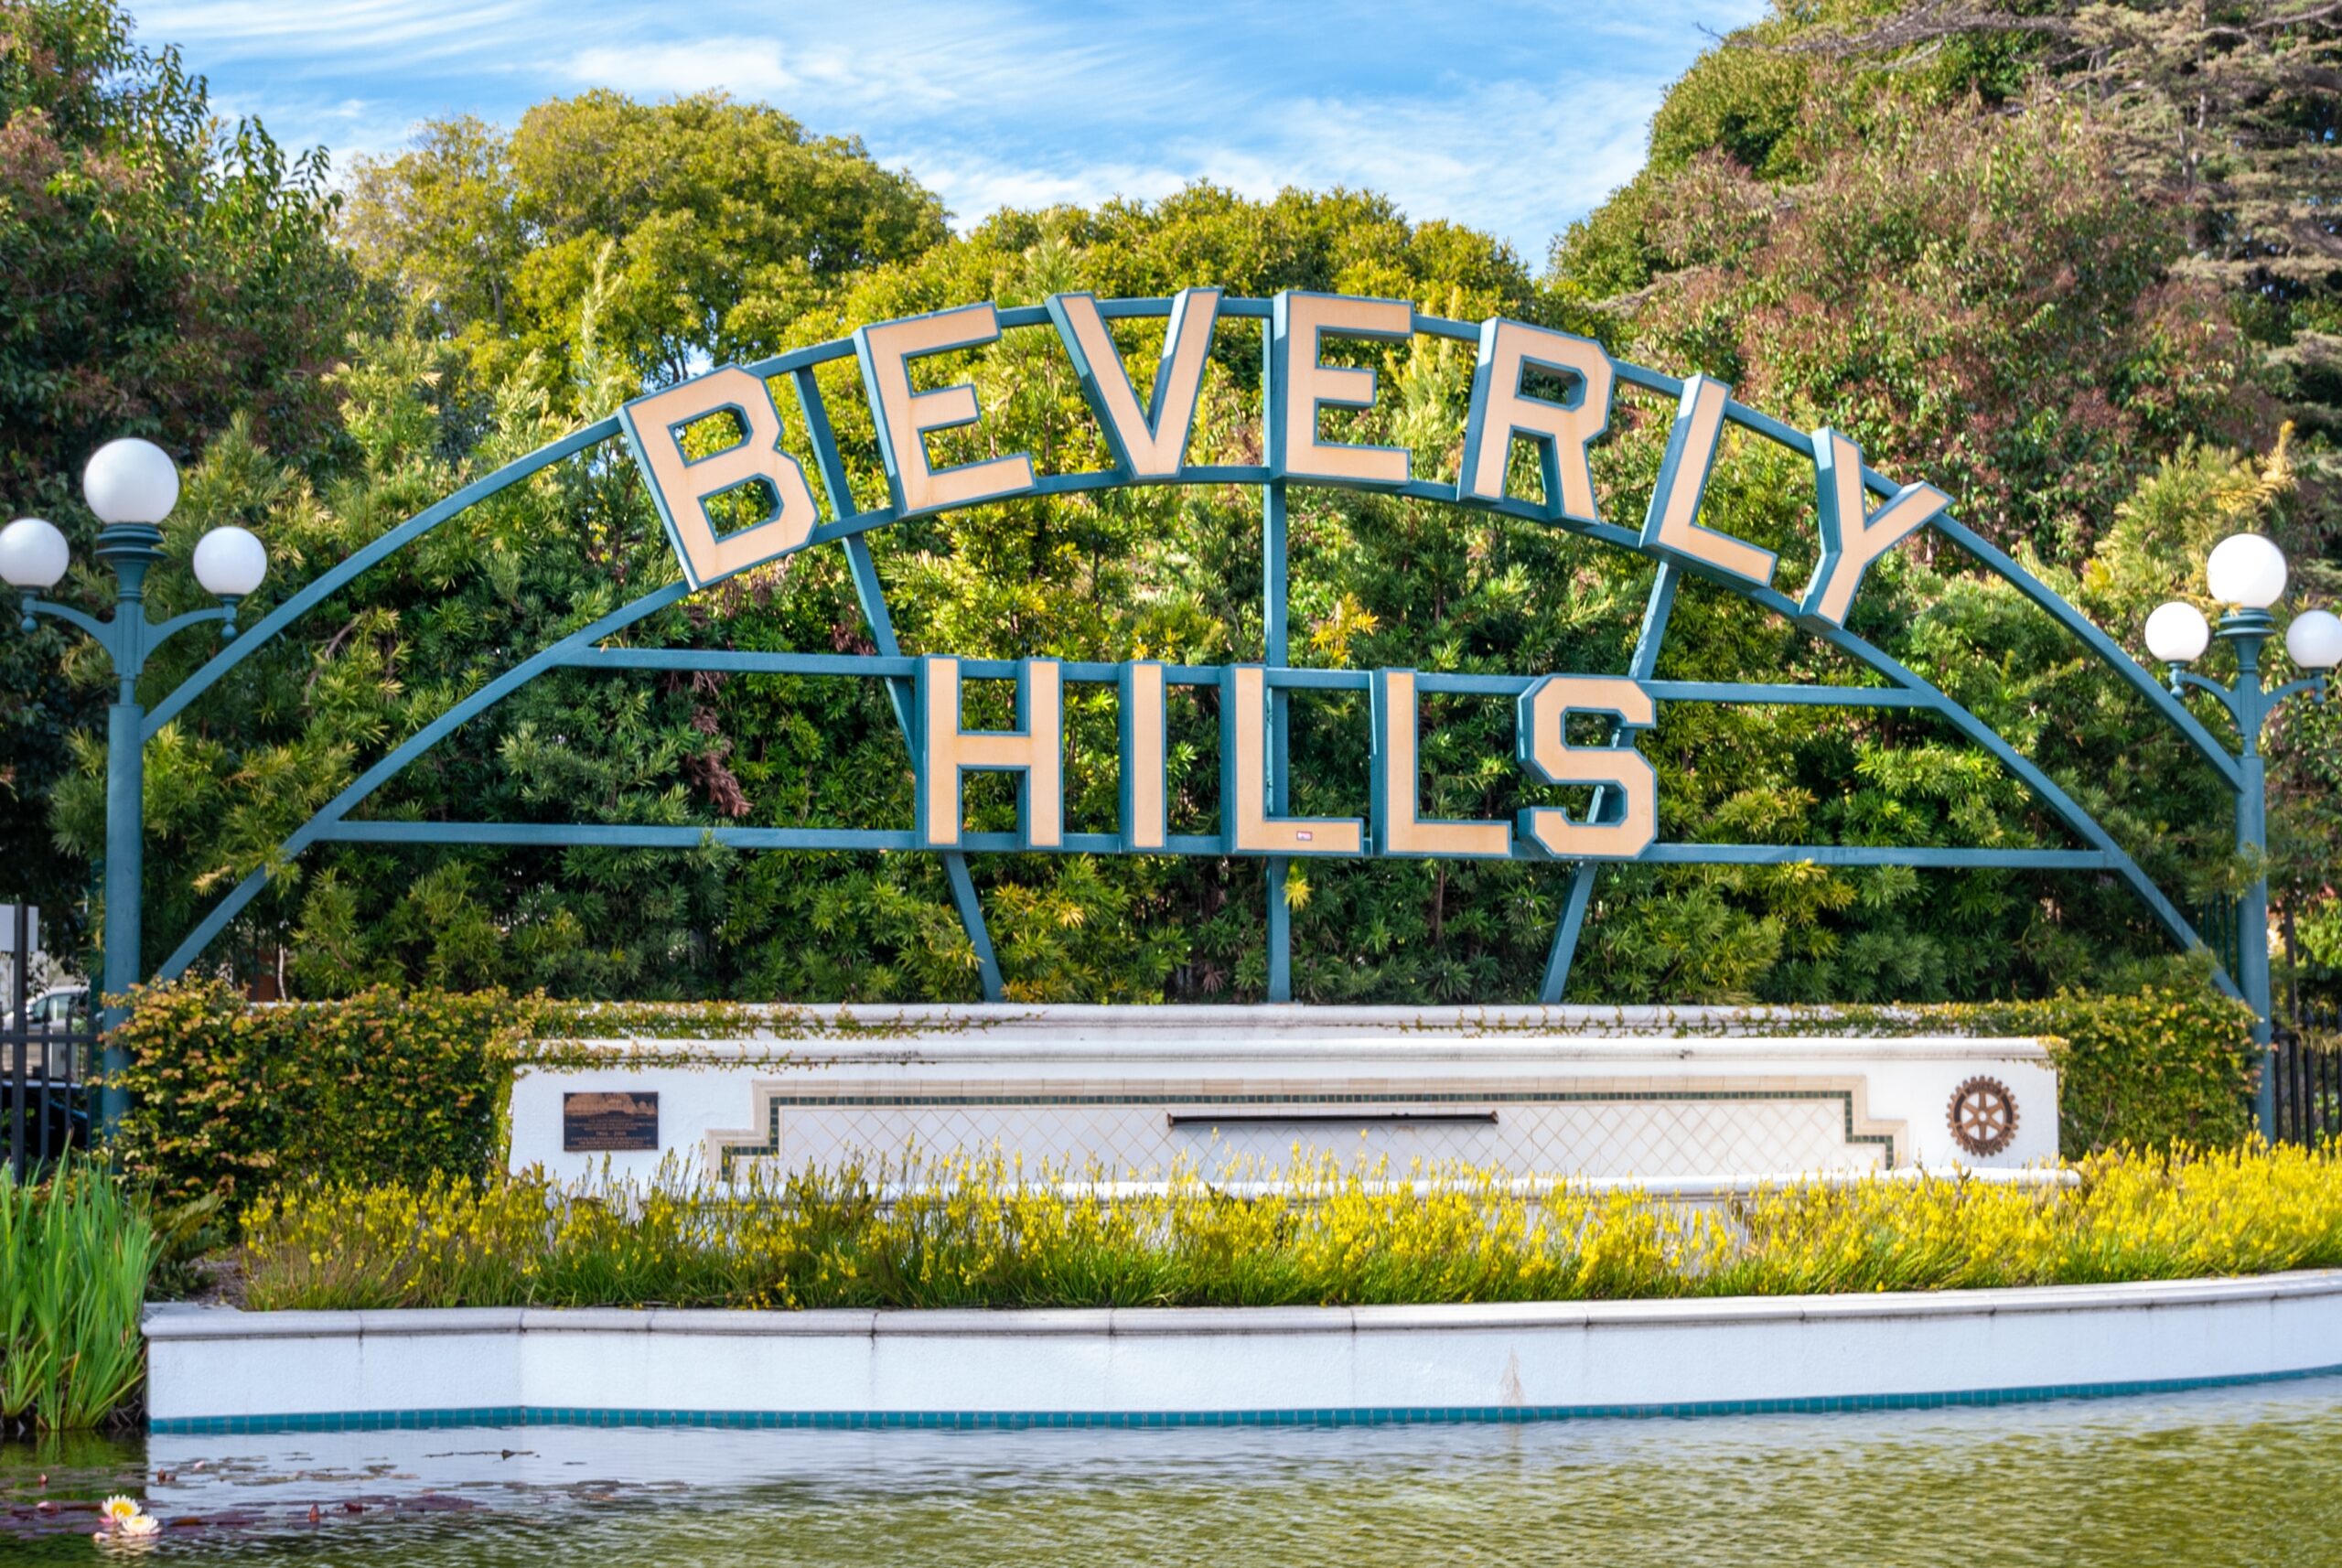 Beverly Hills, California is among the few filming locations of the show Gilmore Girls. 
pictured: The Beverly Hills sign in California in front of well trimmed hedges 